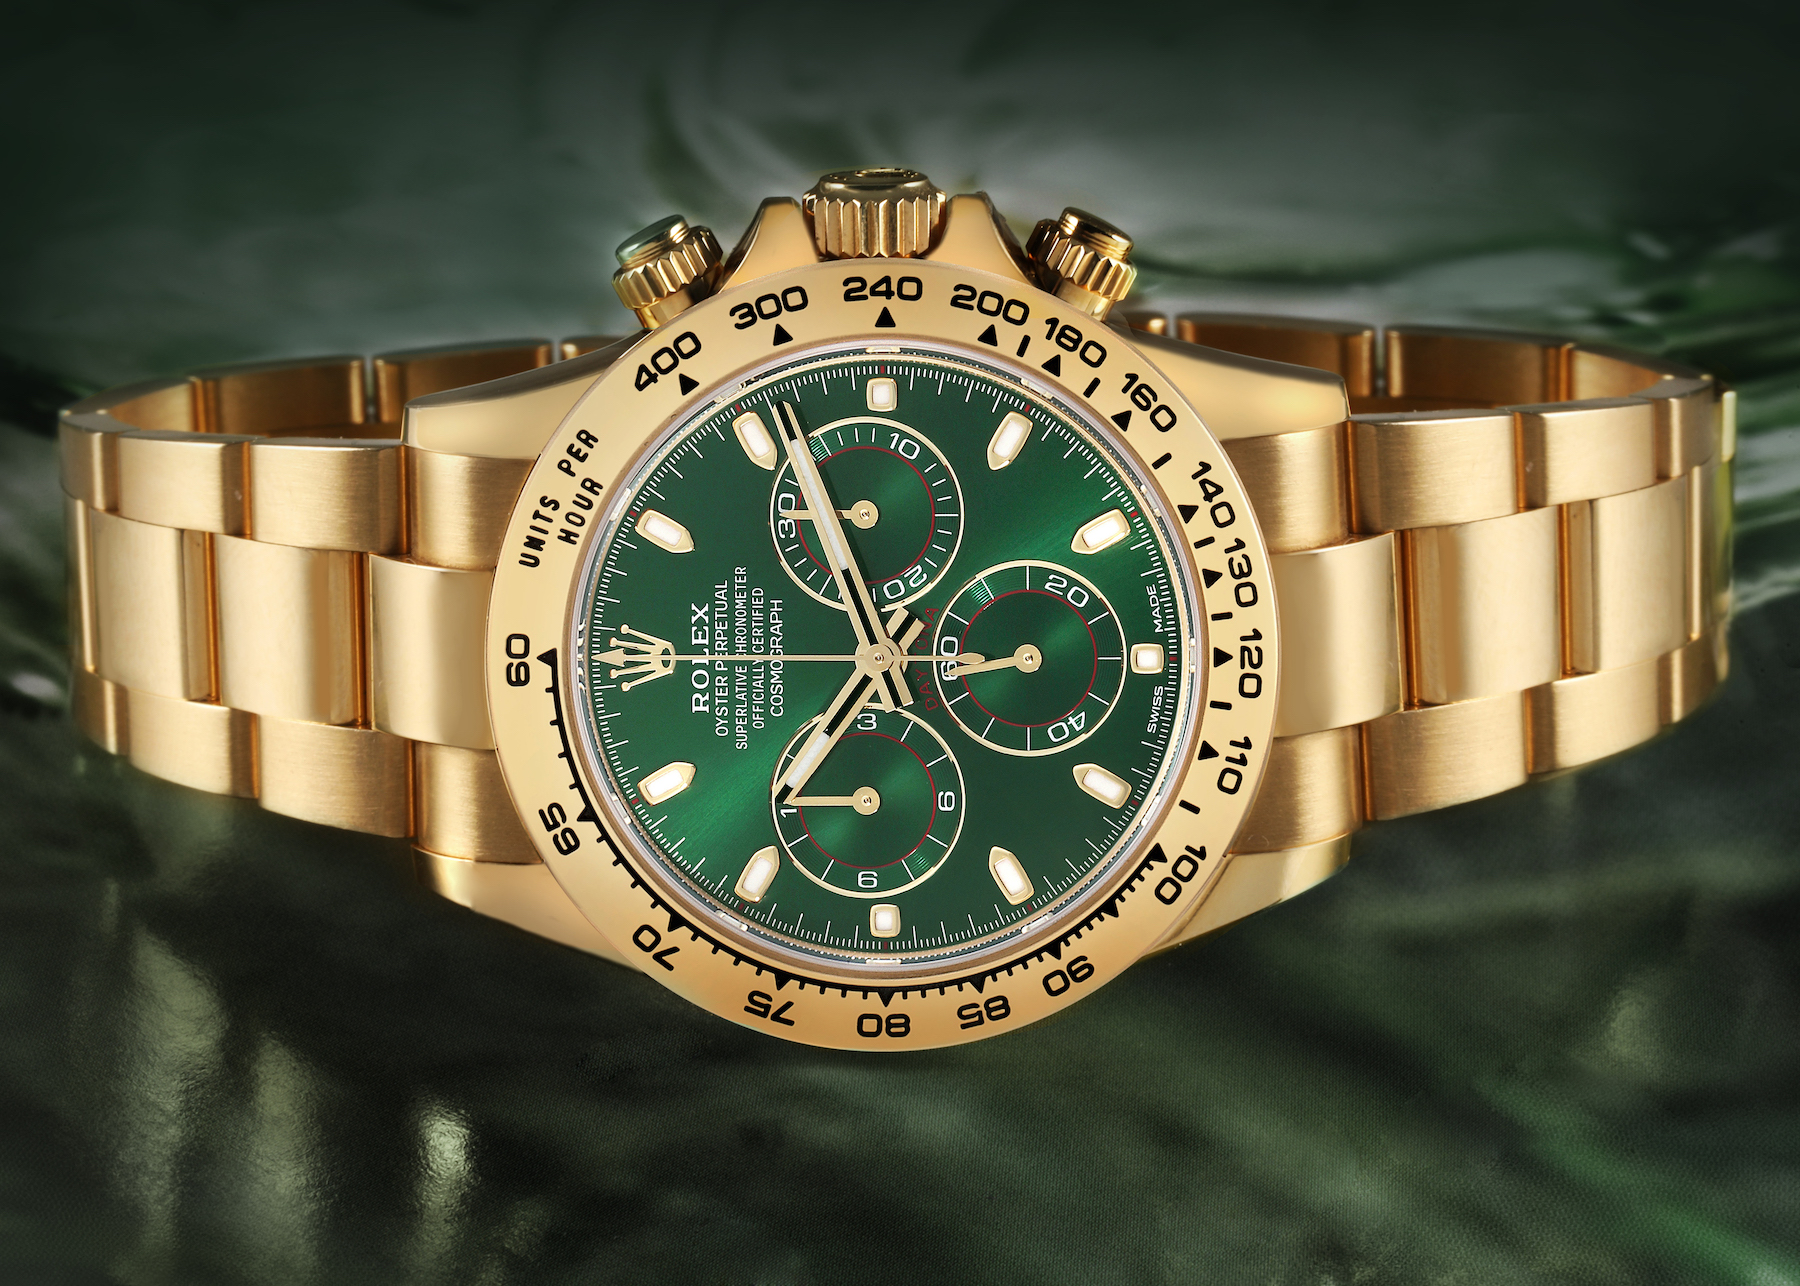 The Daytona Rolex Watch: An Icon of Performance and Luxury